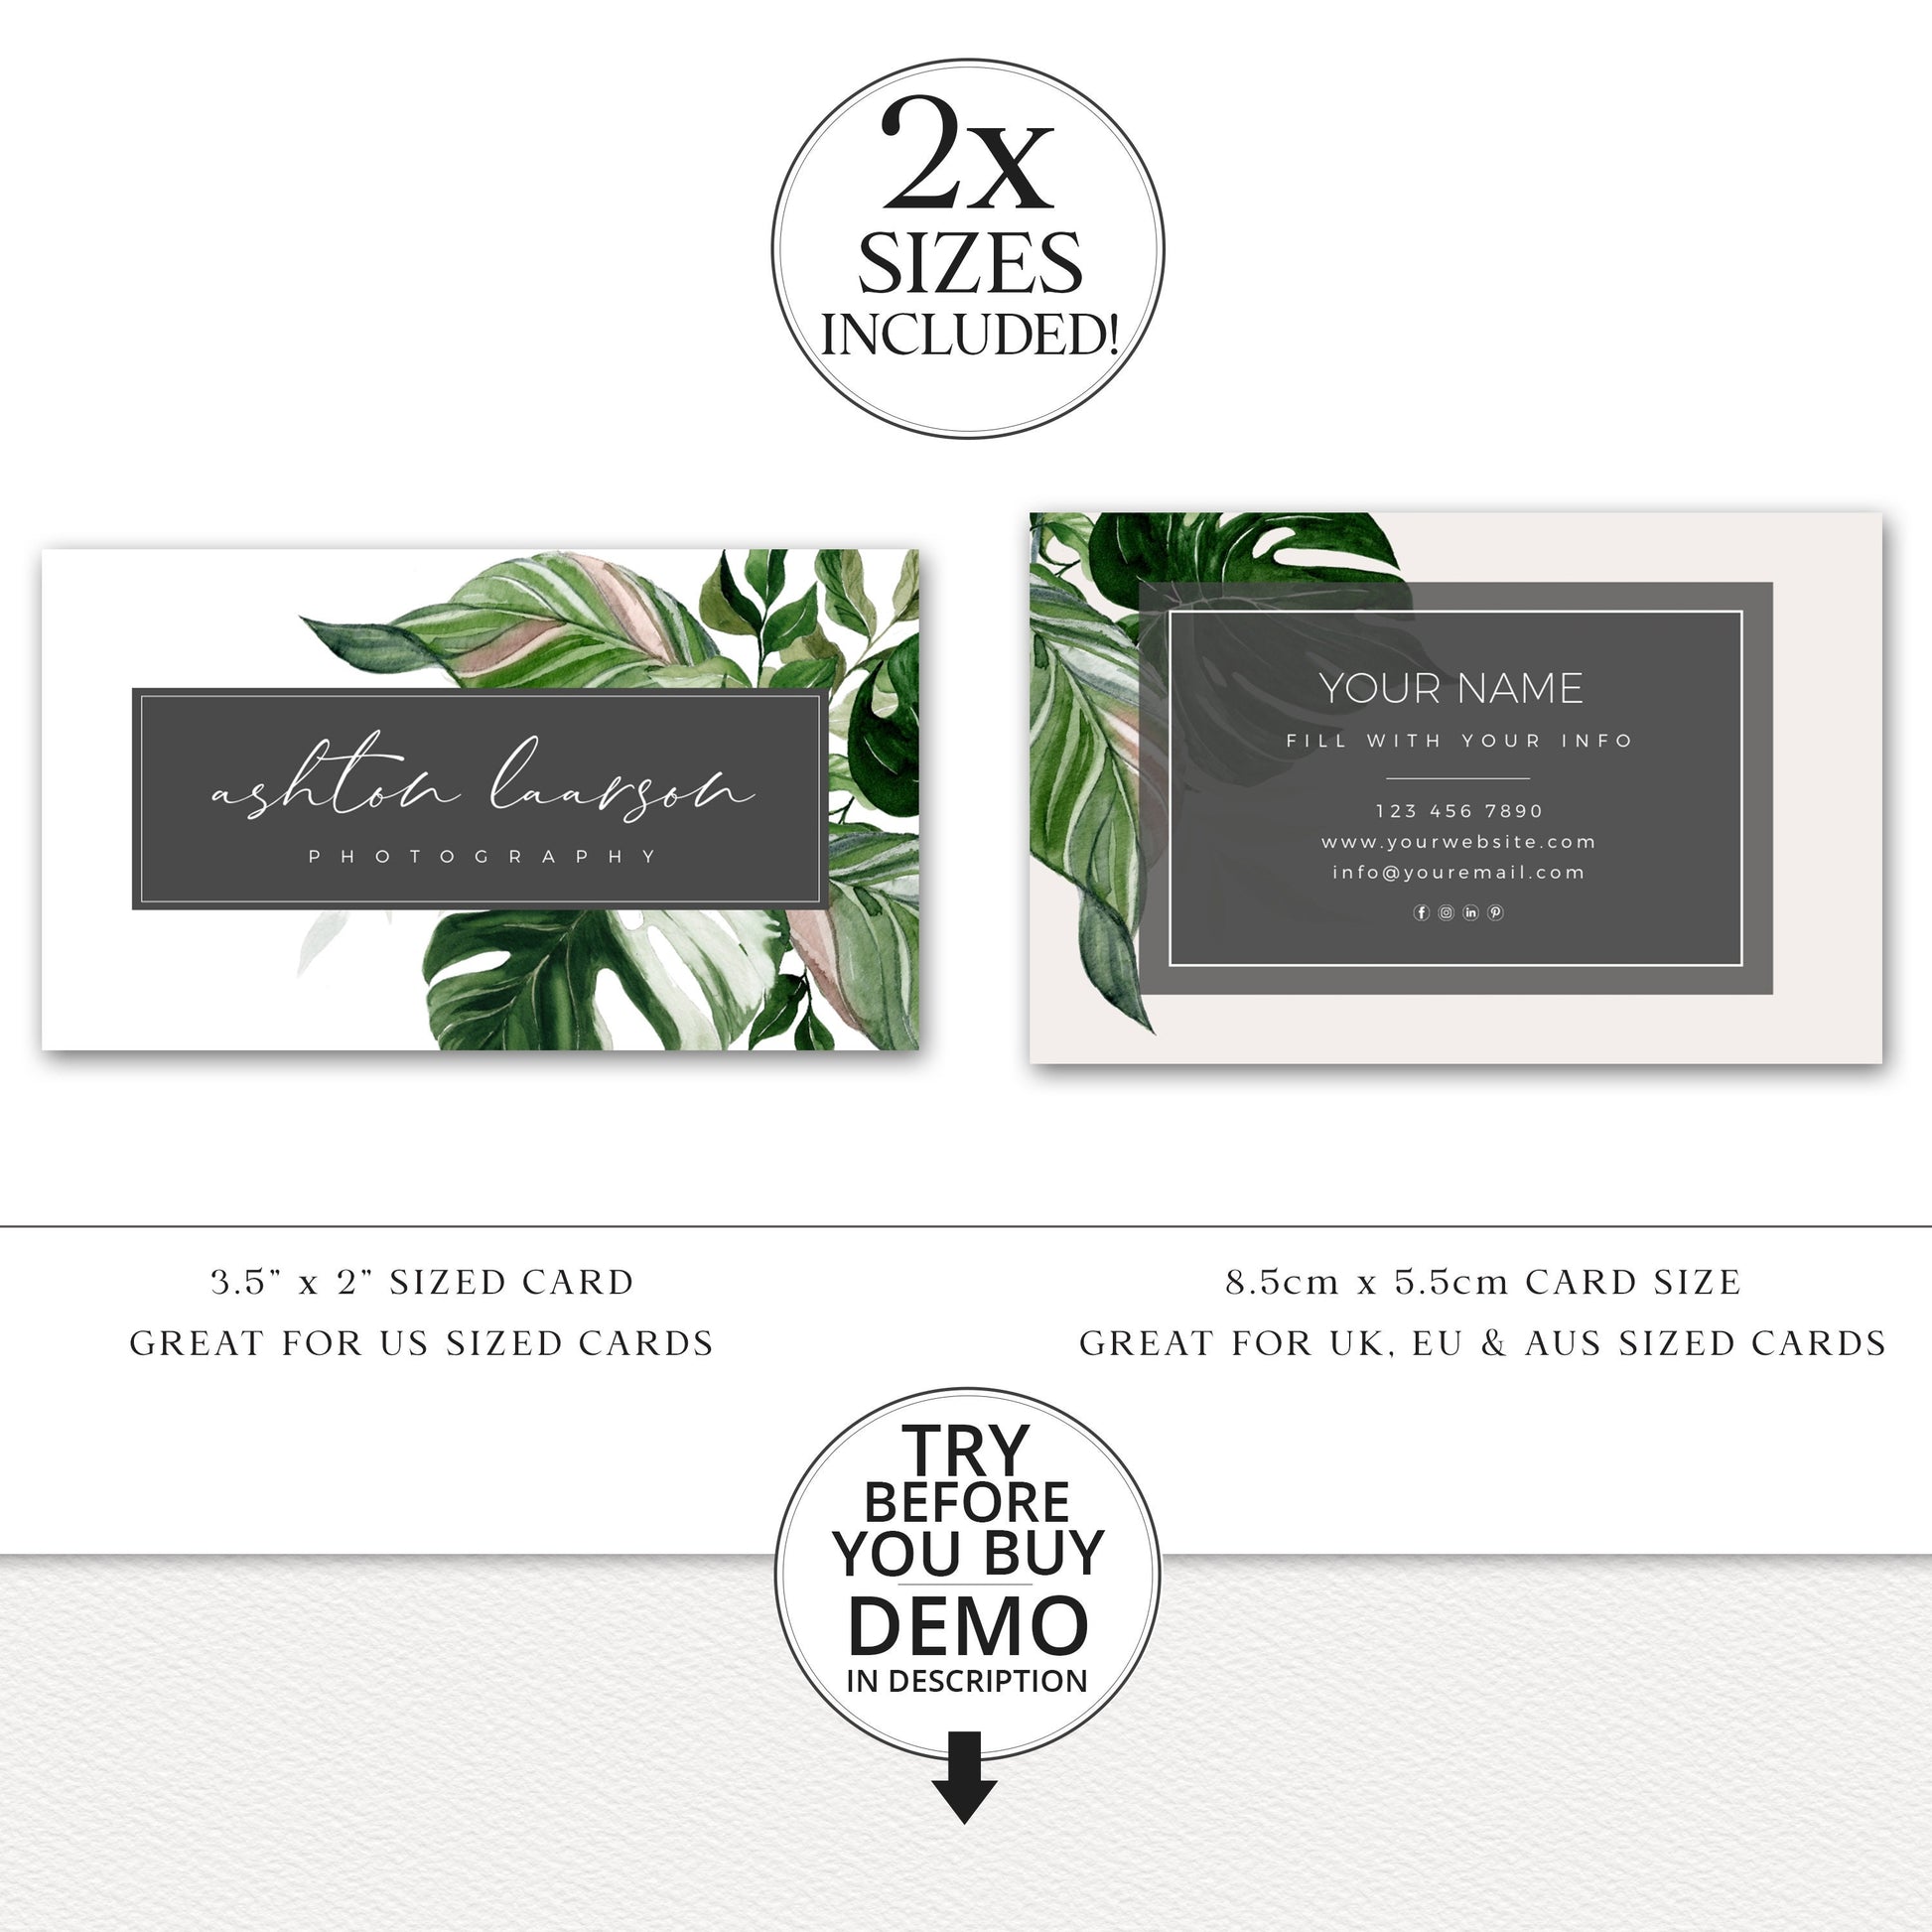 Printable Business Cards Template